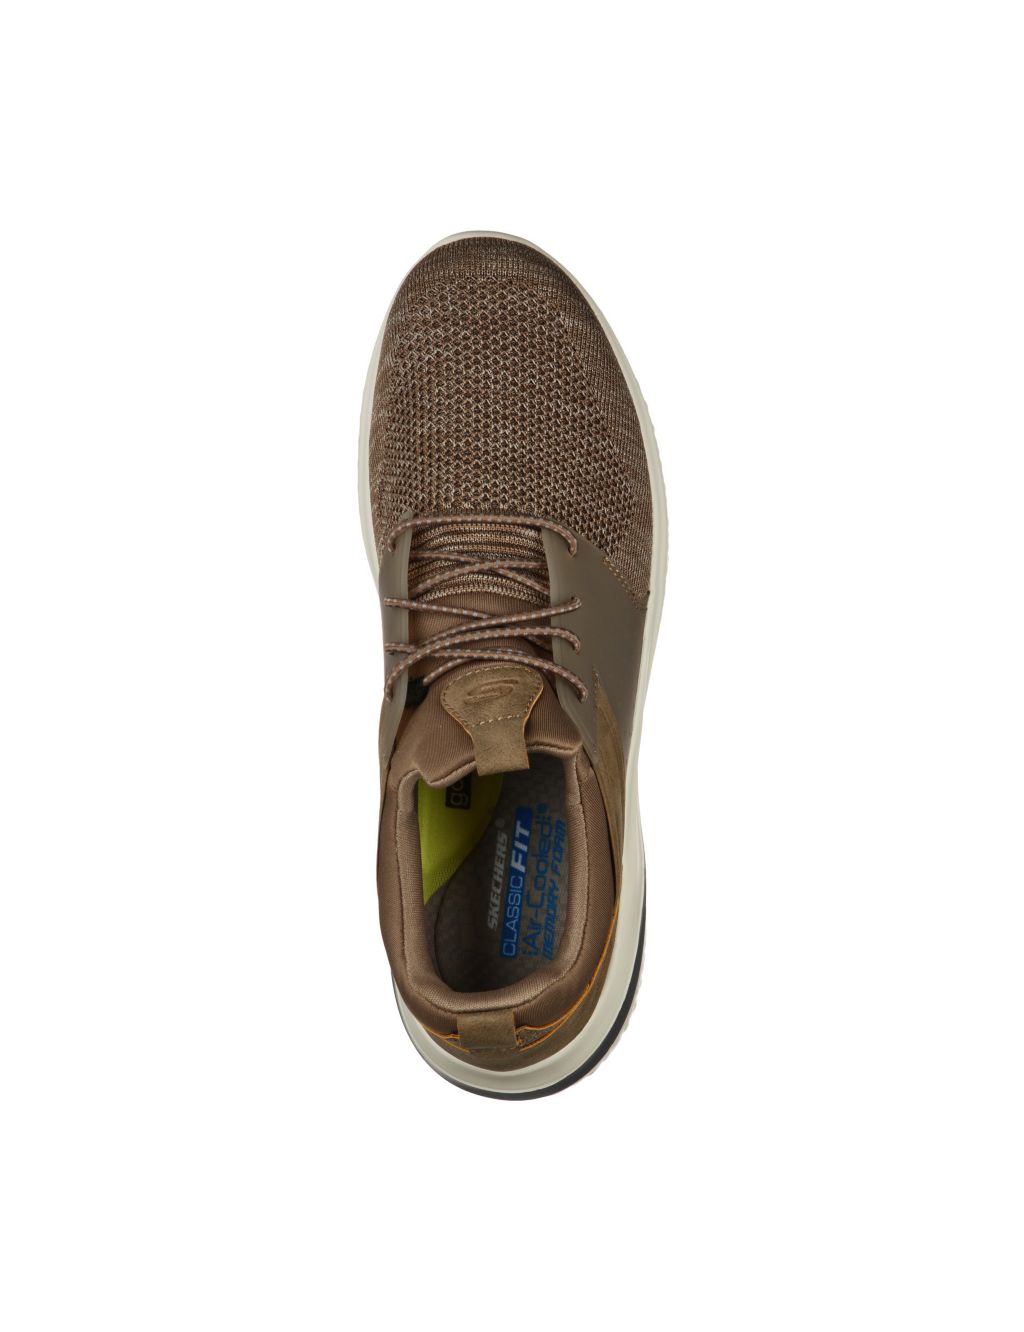 Delson 3.0 Cicada Slip-On Trainers image 3